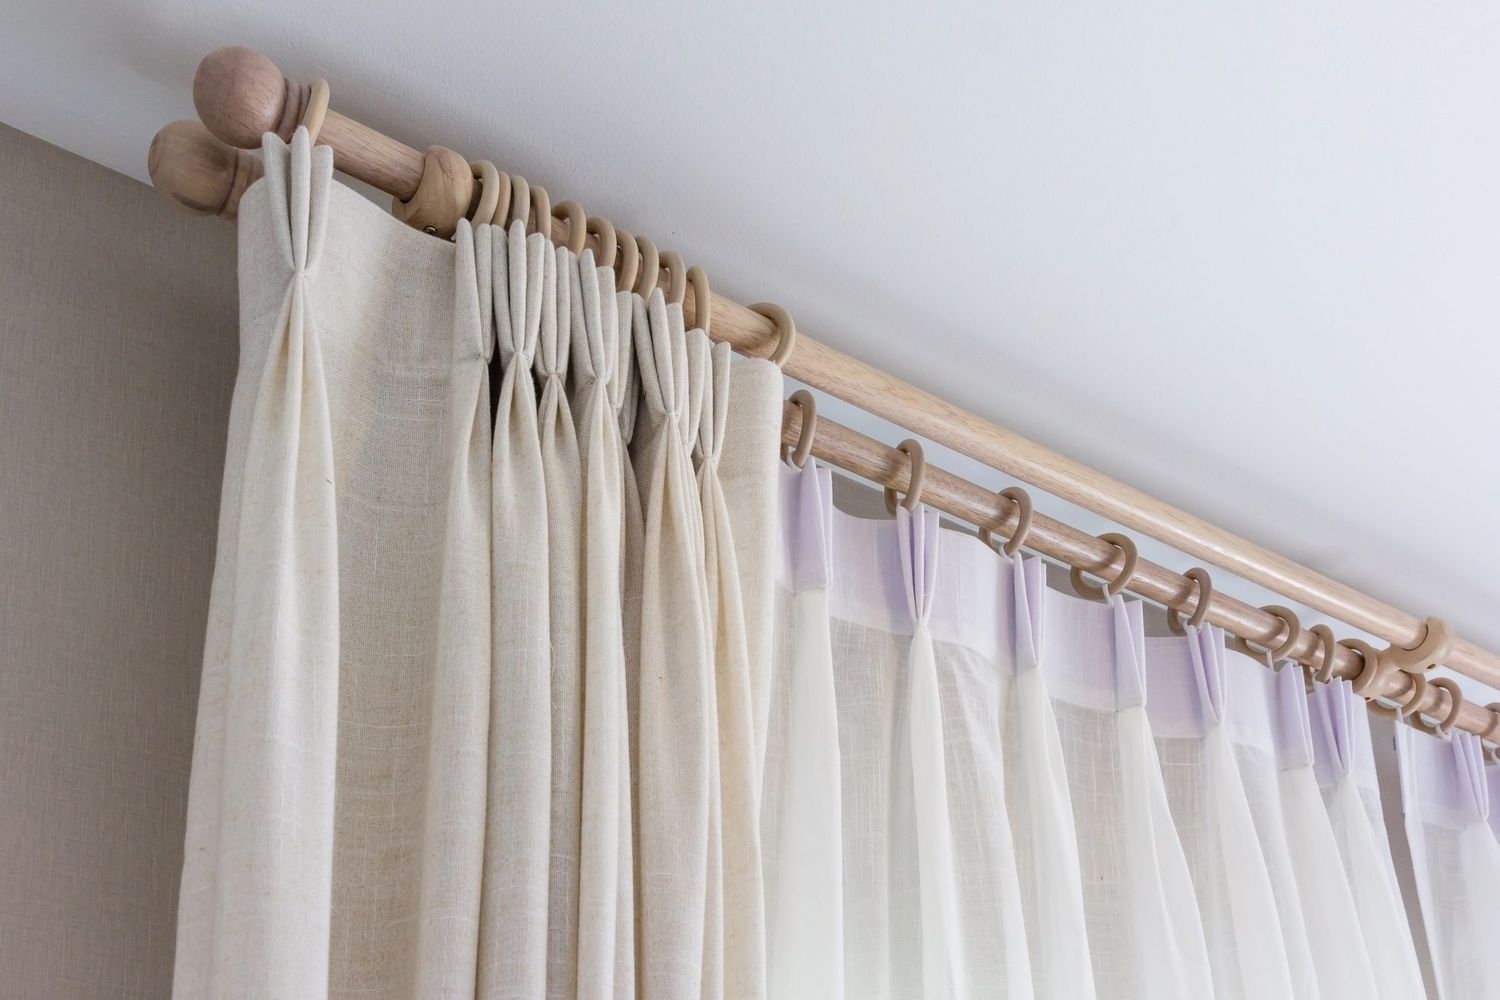 How To Clean Curtains And Drapes For Spotless Window Treatments